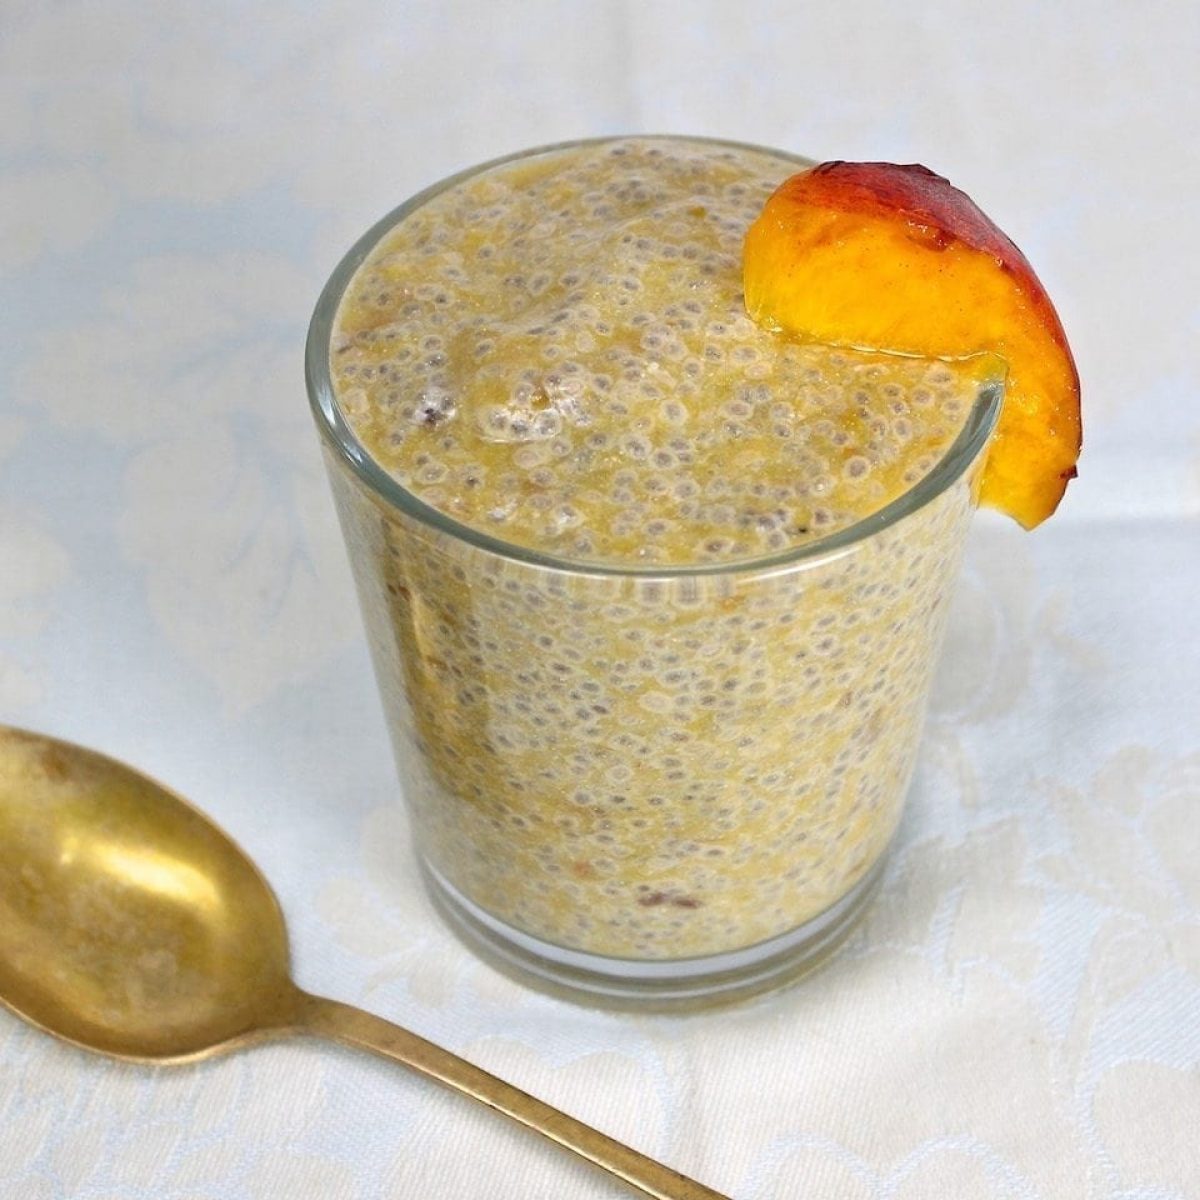 Chia Pudding with Coconut Milk - The Taste of Kosher